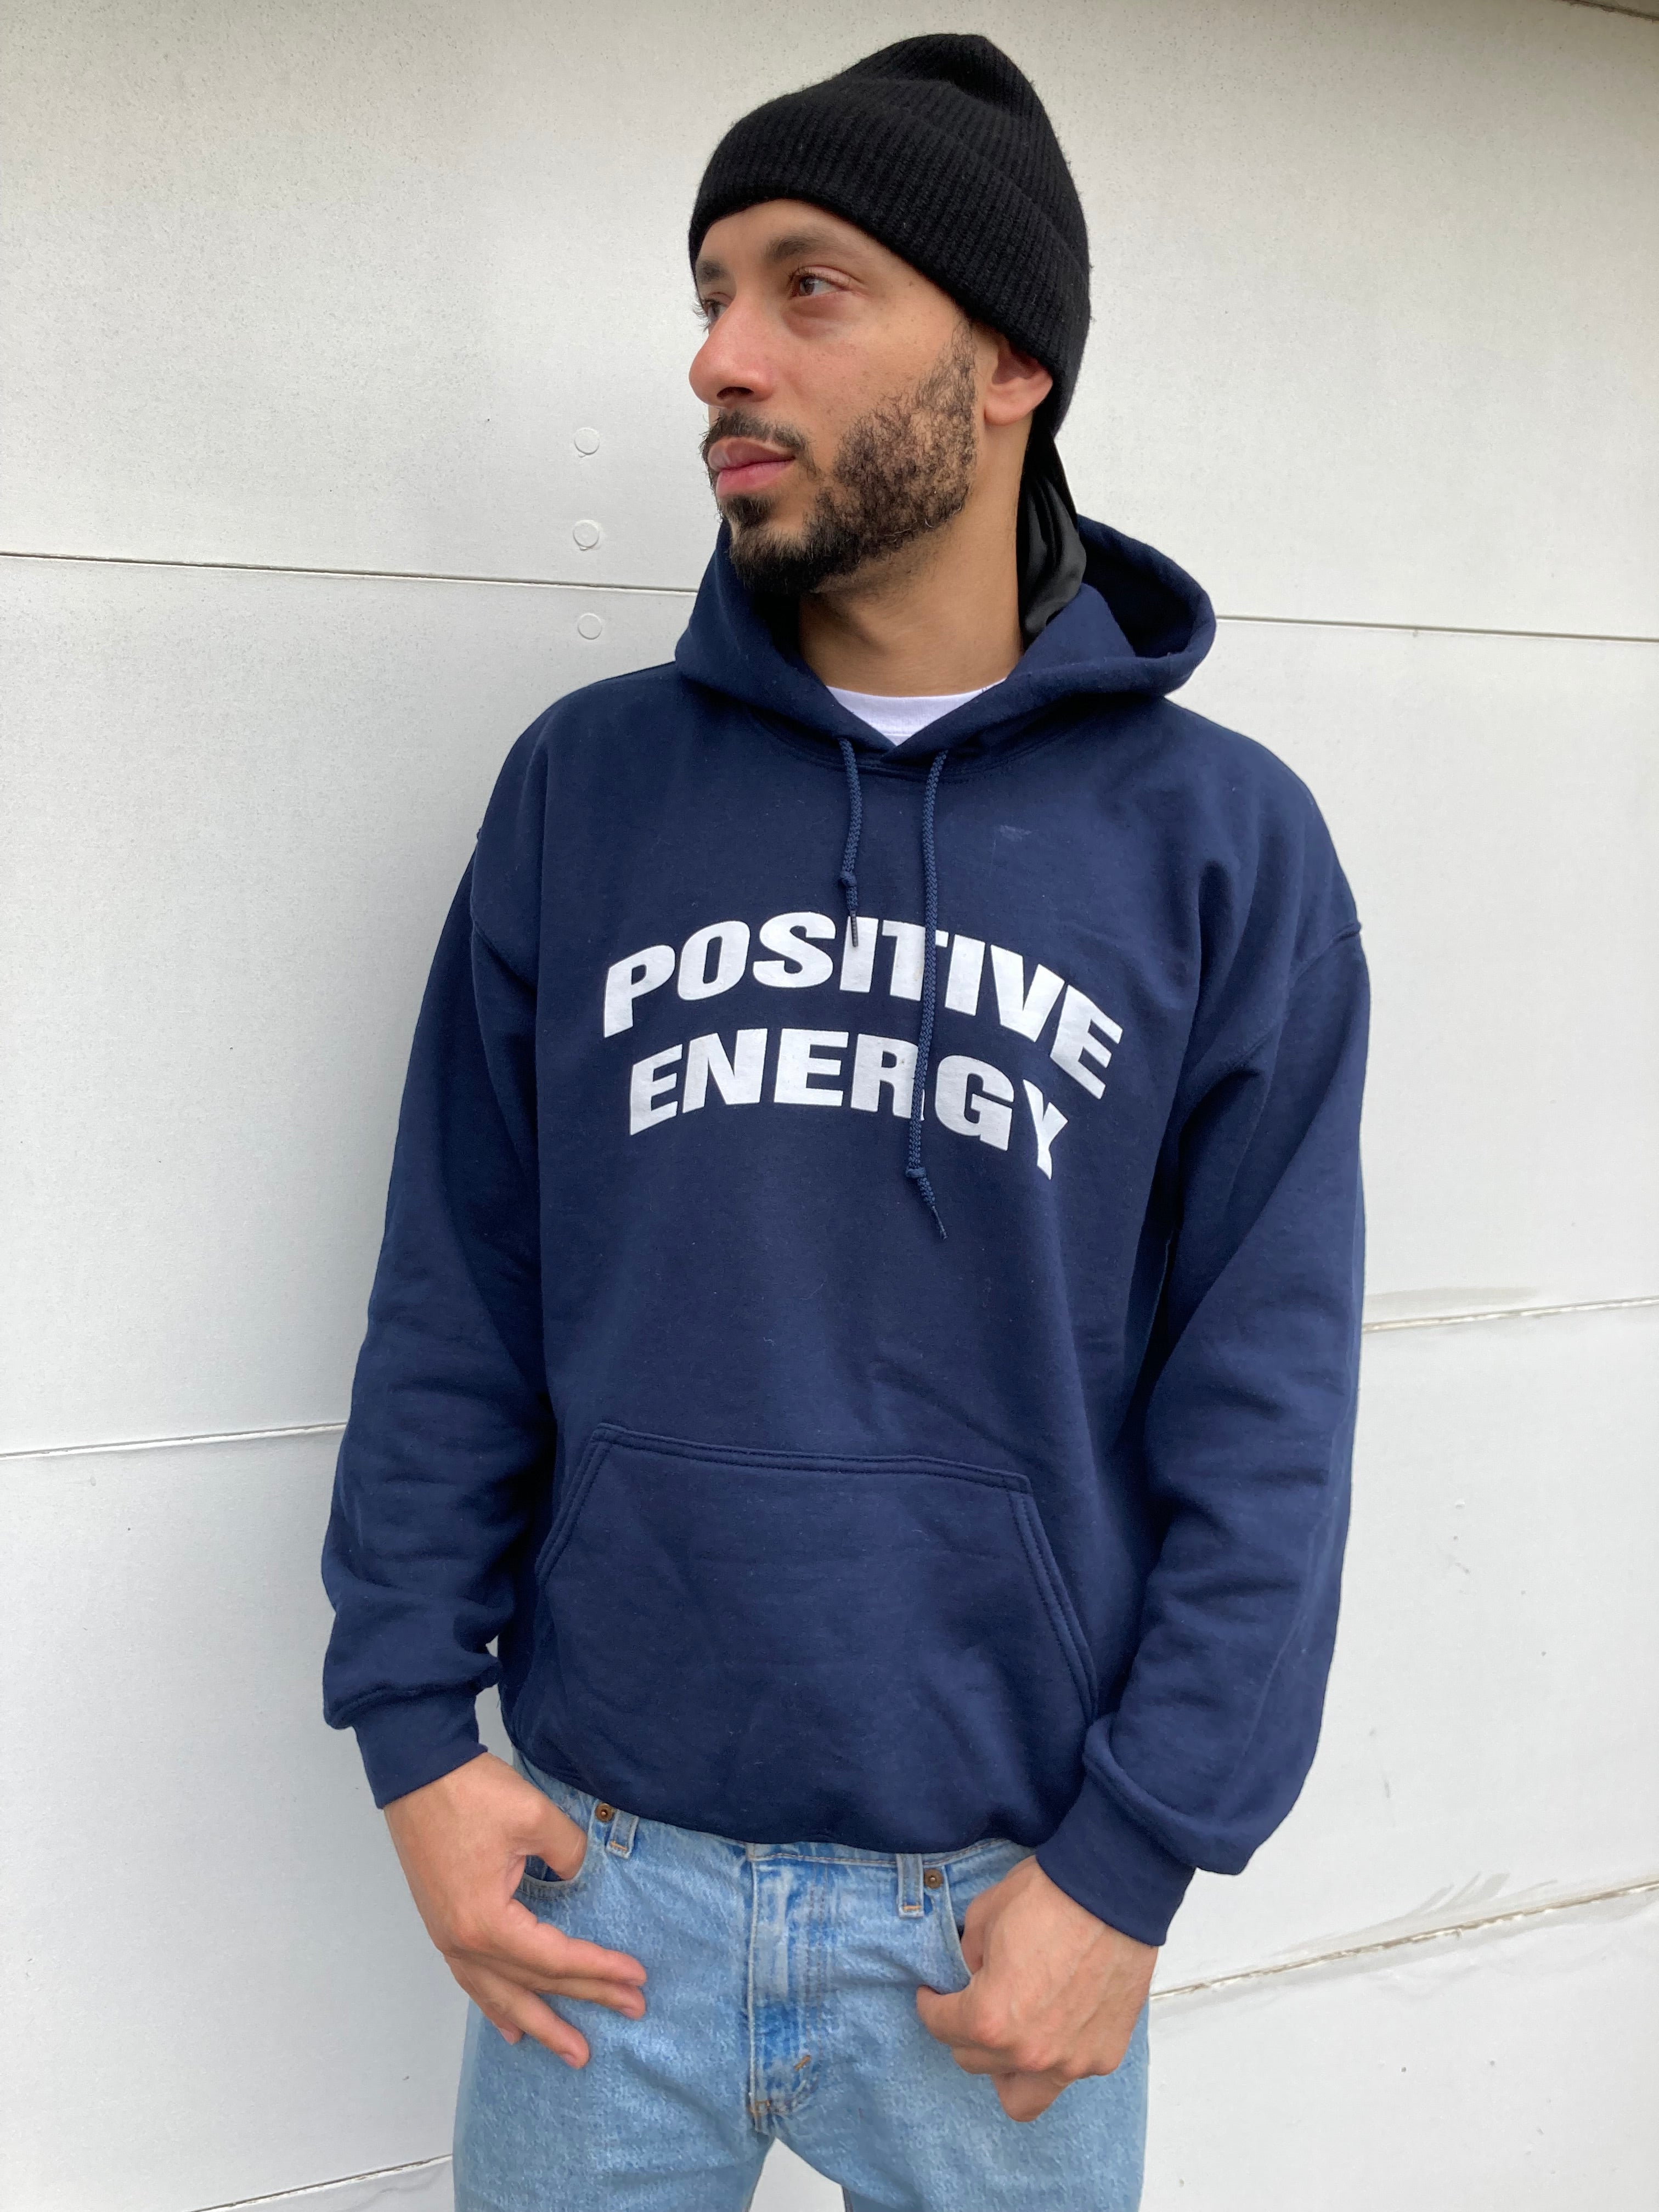 Mens and Womens "Positive Energy" Hoodie